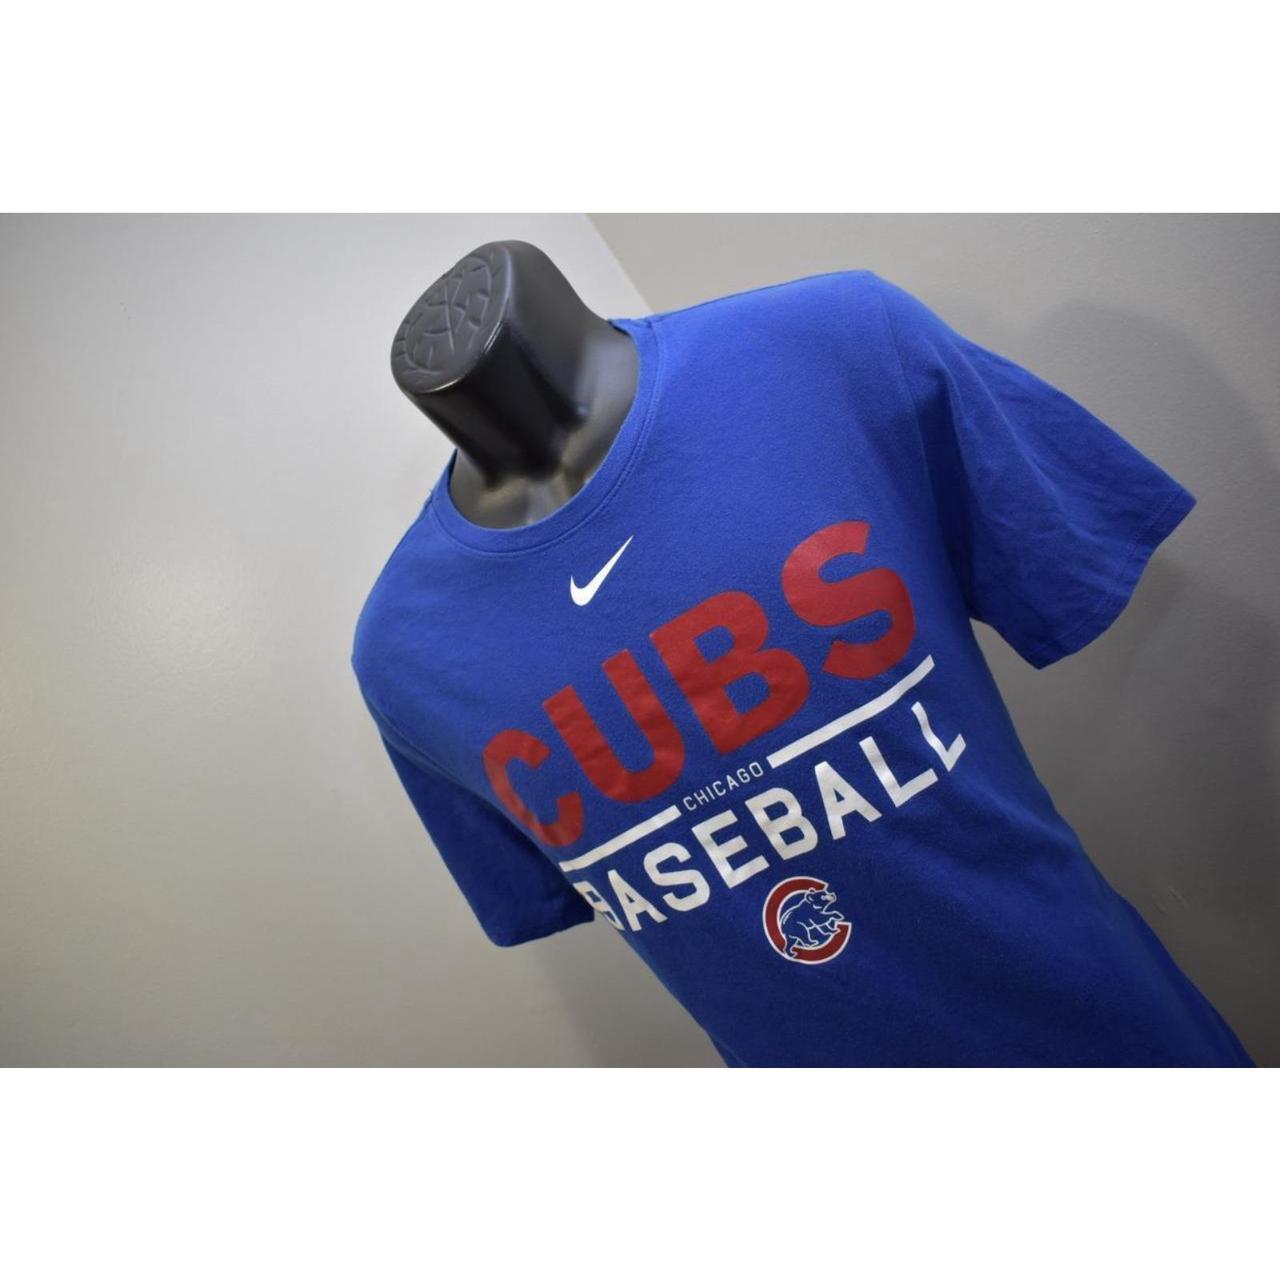 Nike Dri-Fit Early Work (MLB Chicago Cubs) Men's T-Shirt